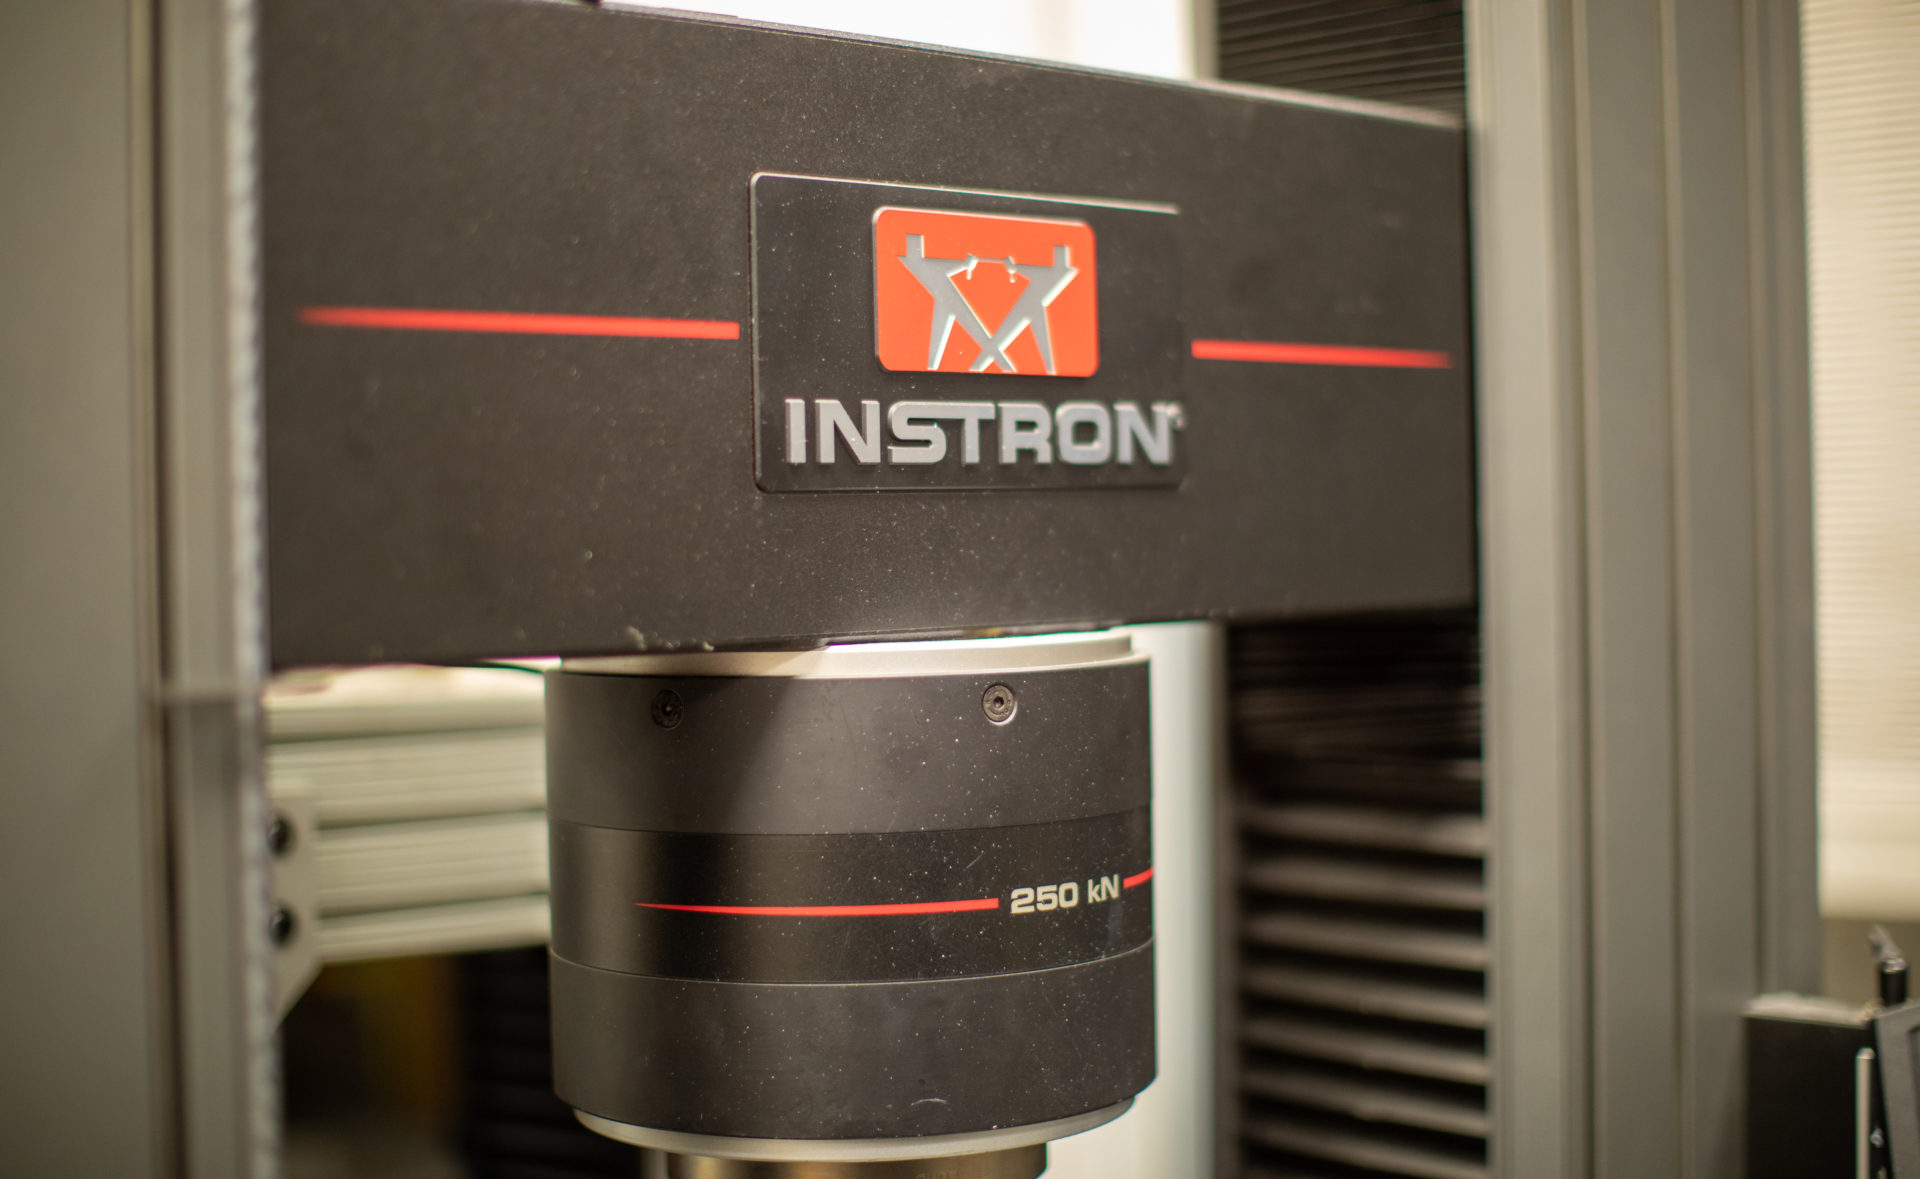 Close up view of Instron logo